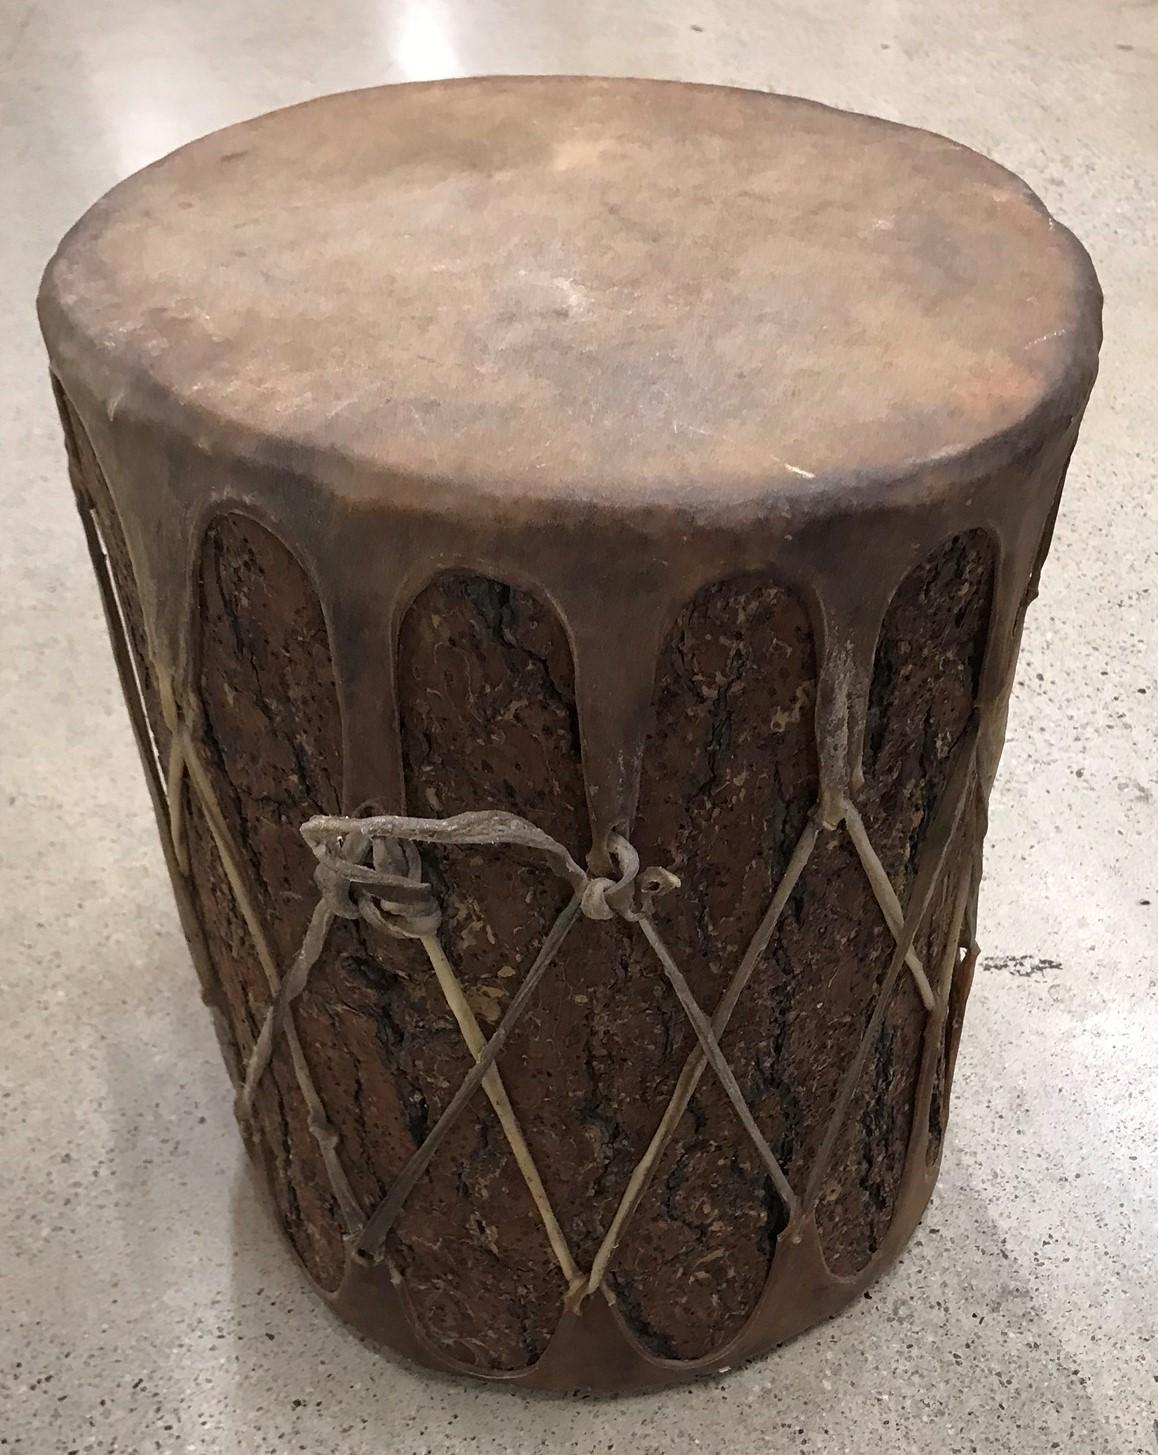 This fantastic early handmade bark covered drum has the original hide covering and in great condition. Has a wonderful aged patina.